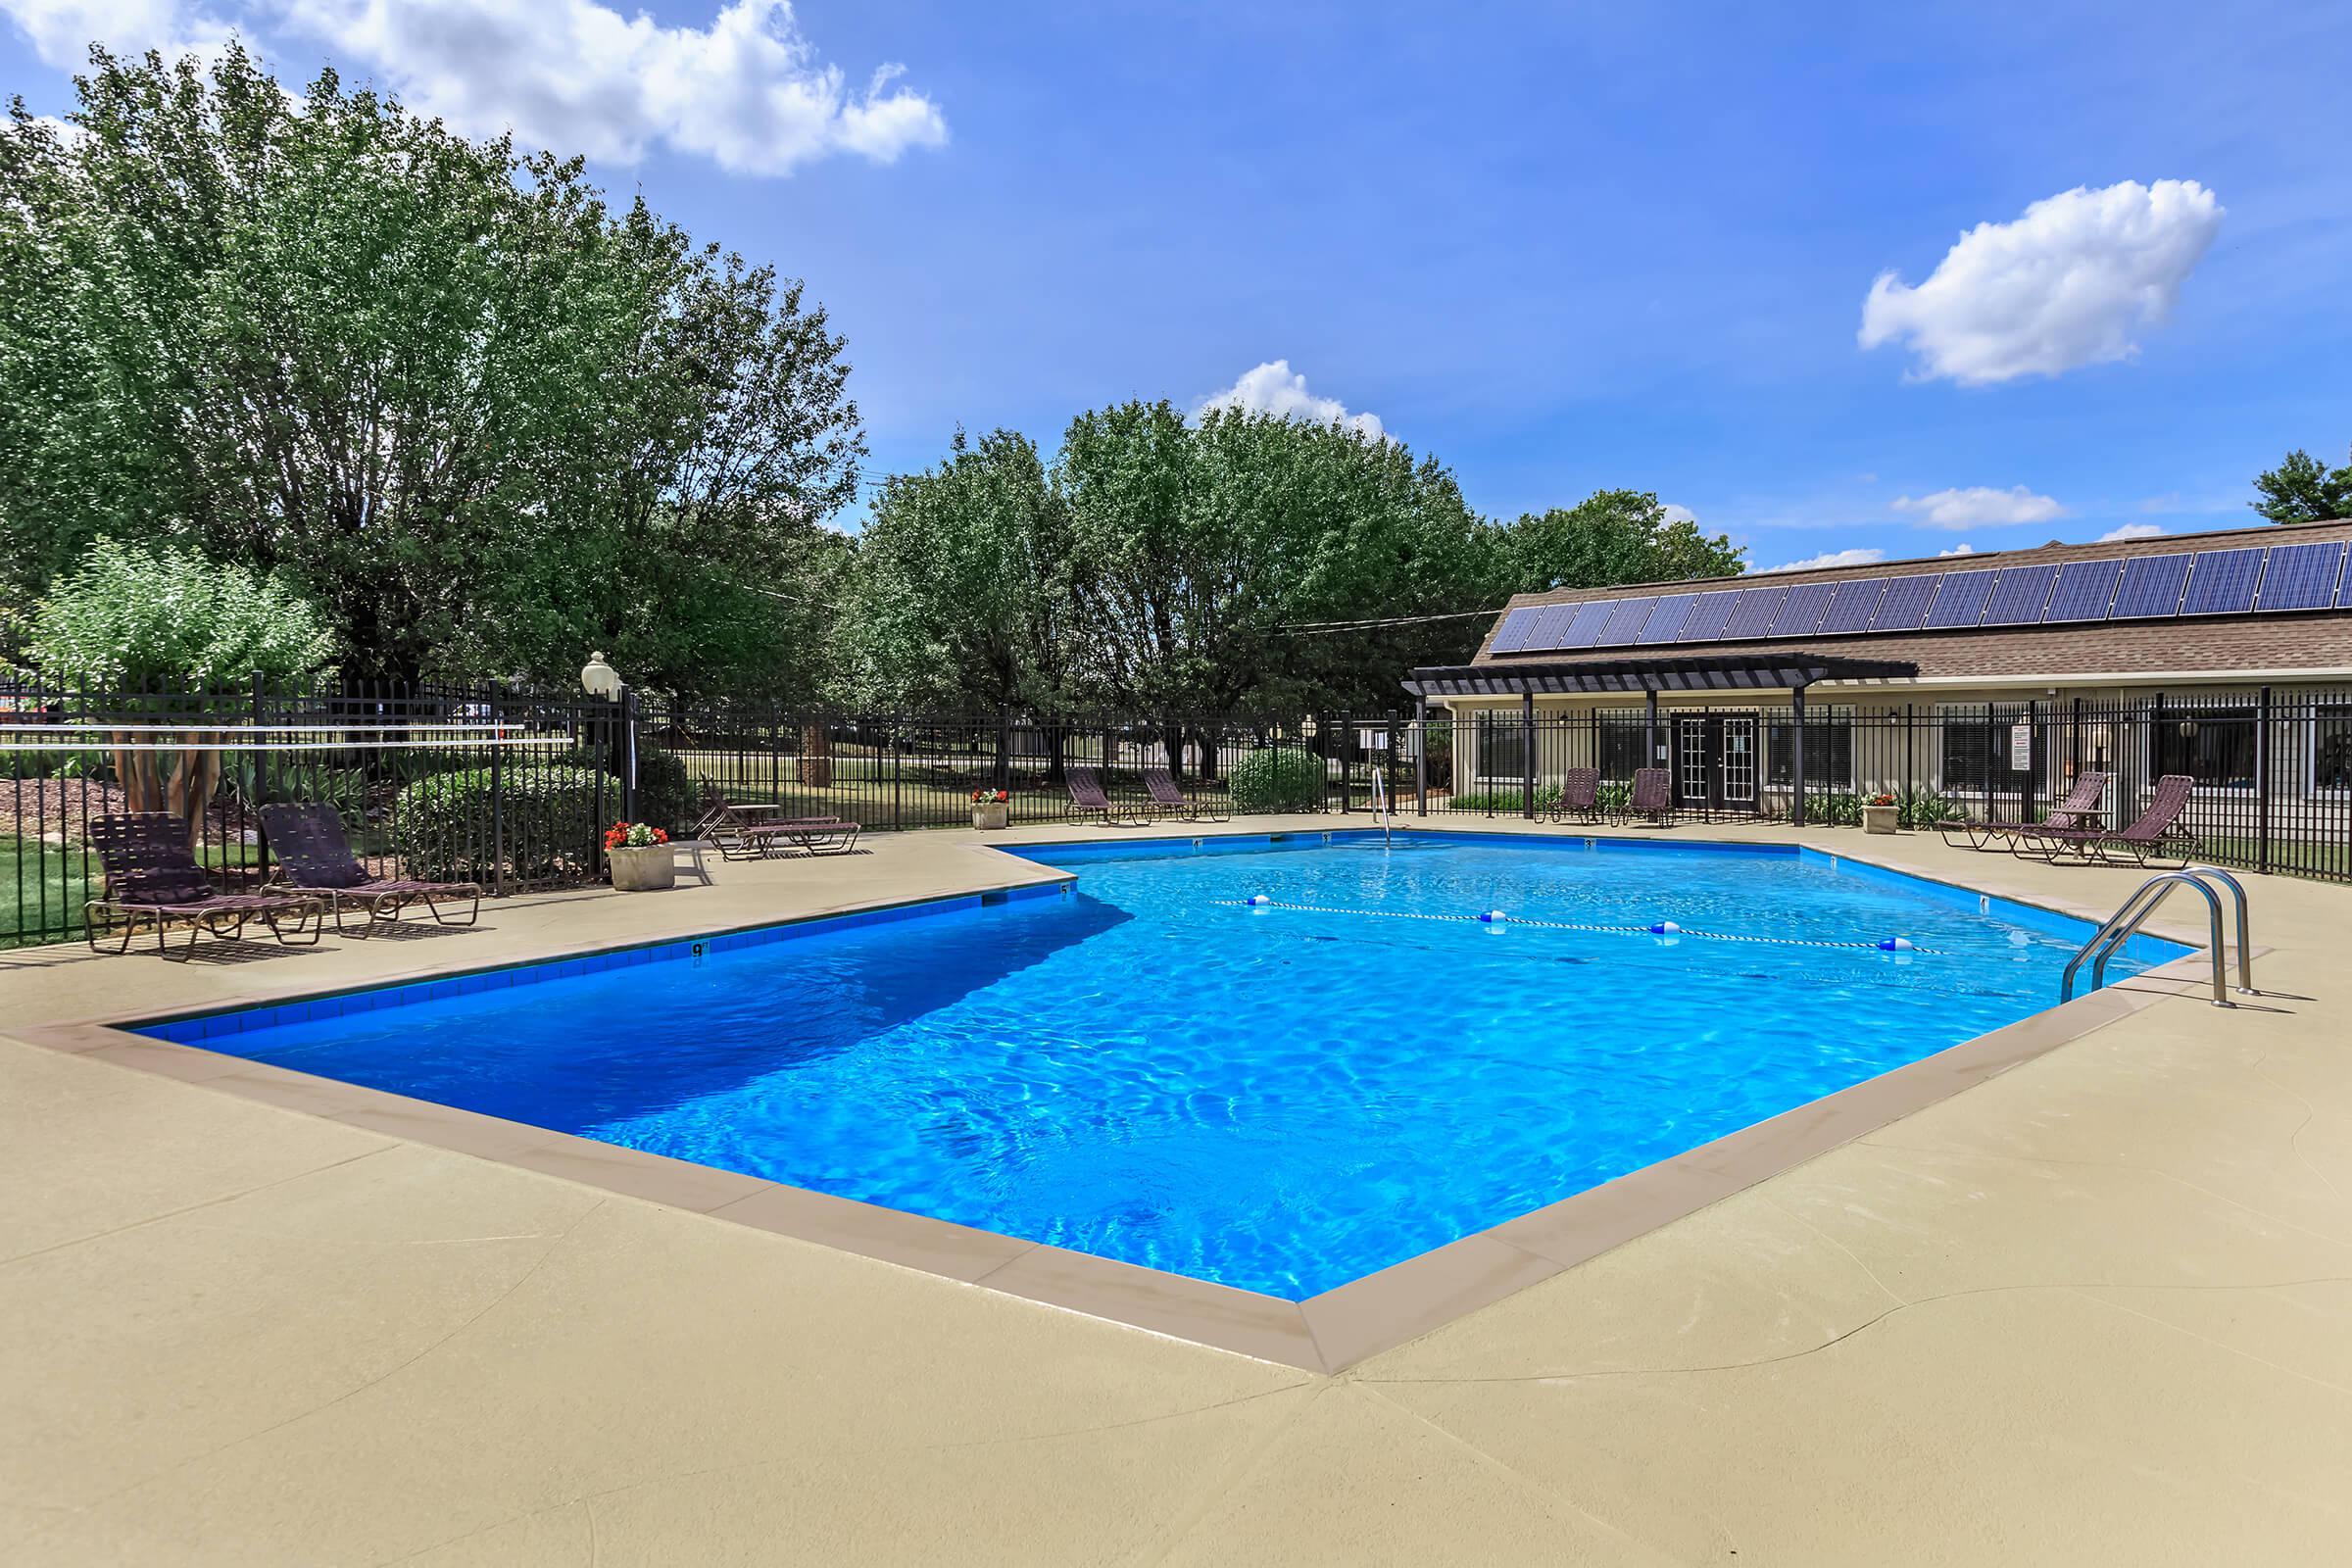 Make Some Waves at Chase Cove Apartments in Nashville, TN